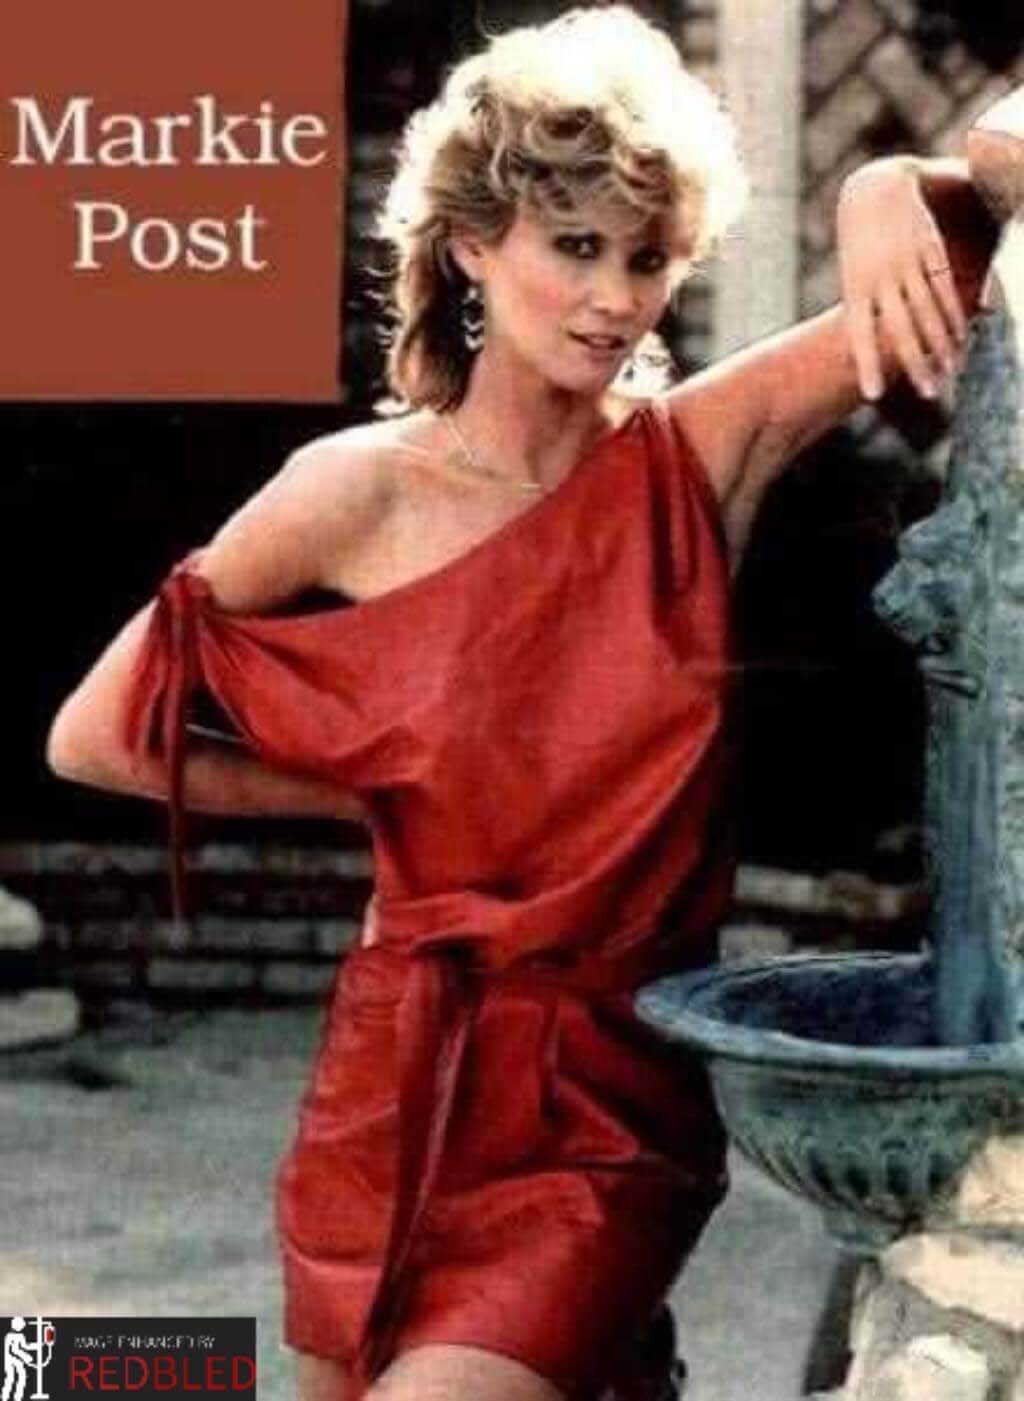 Nsfw markie post Picture Gallery